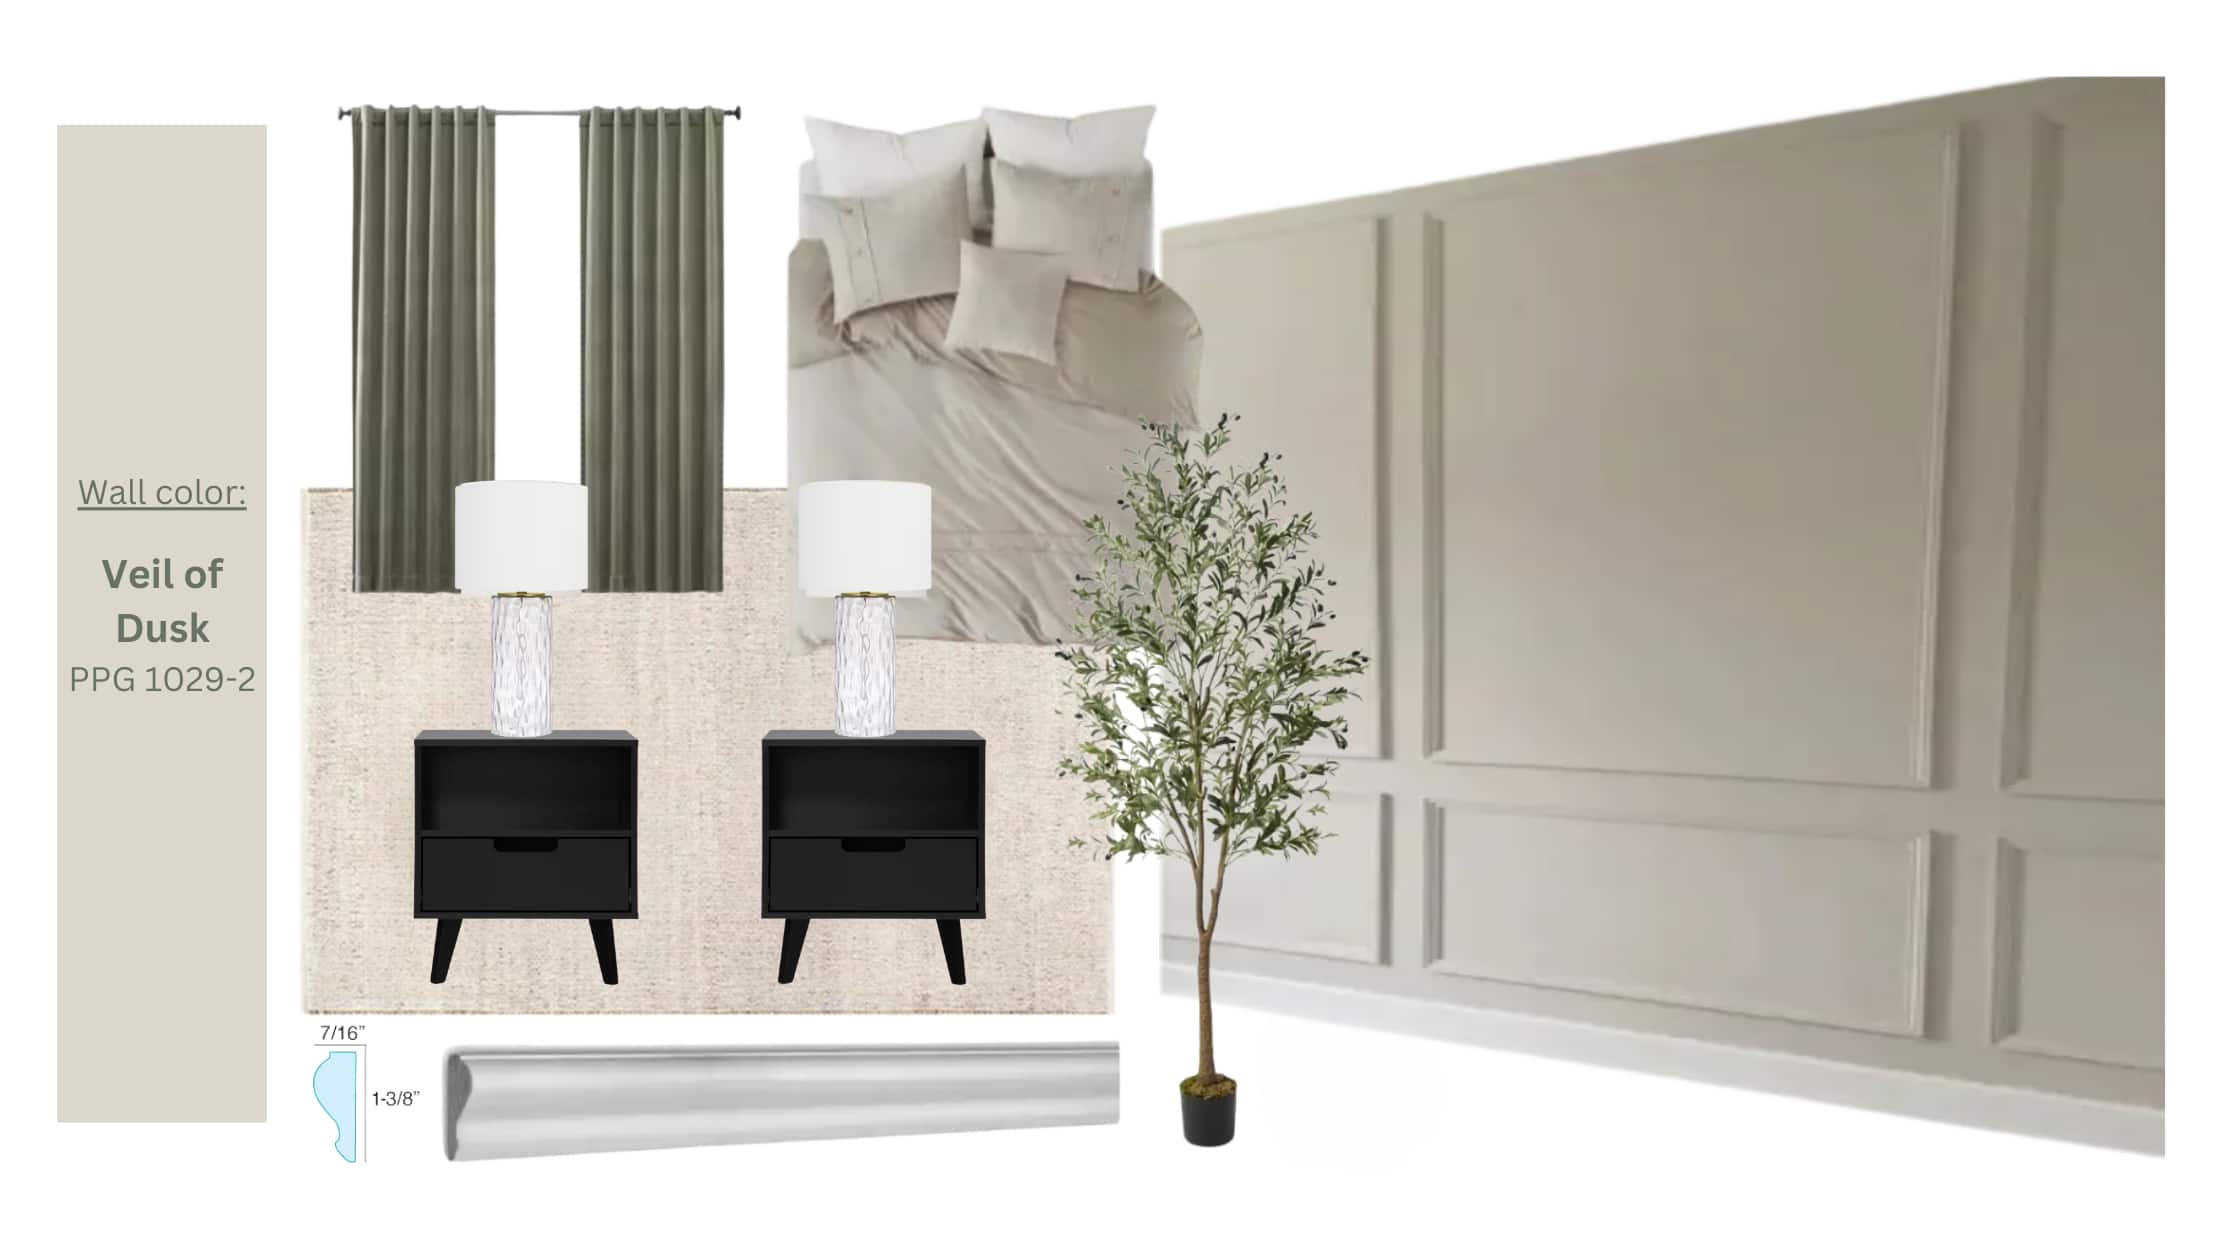 A mood board to outline the bedroom makeover